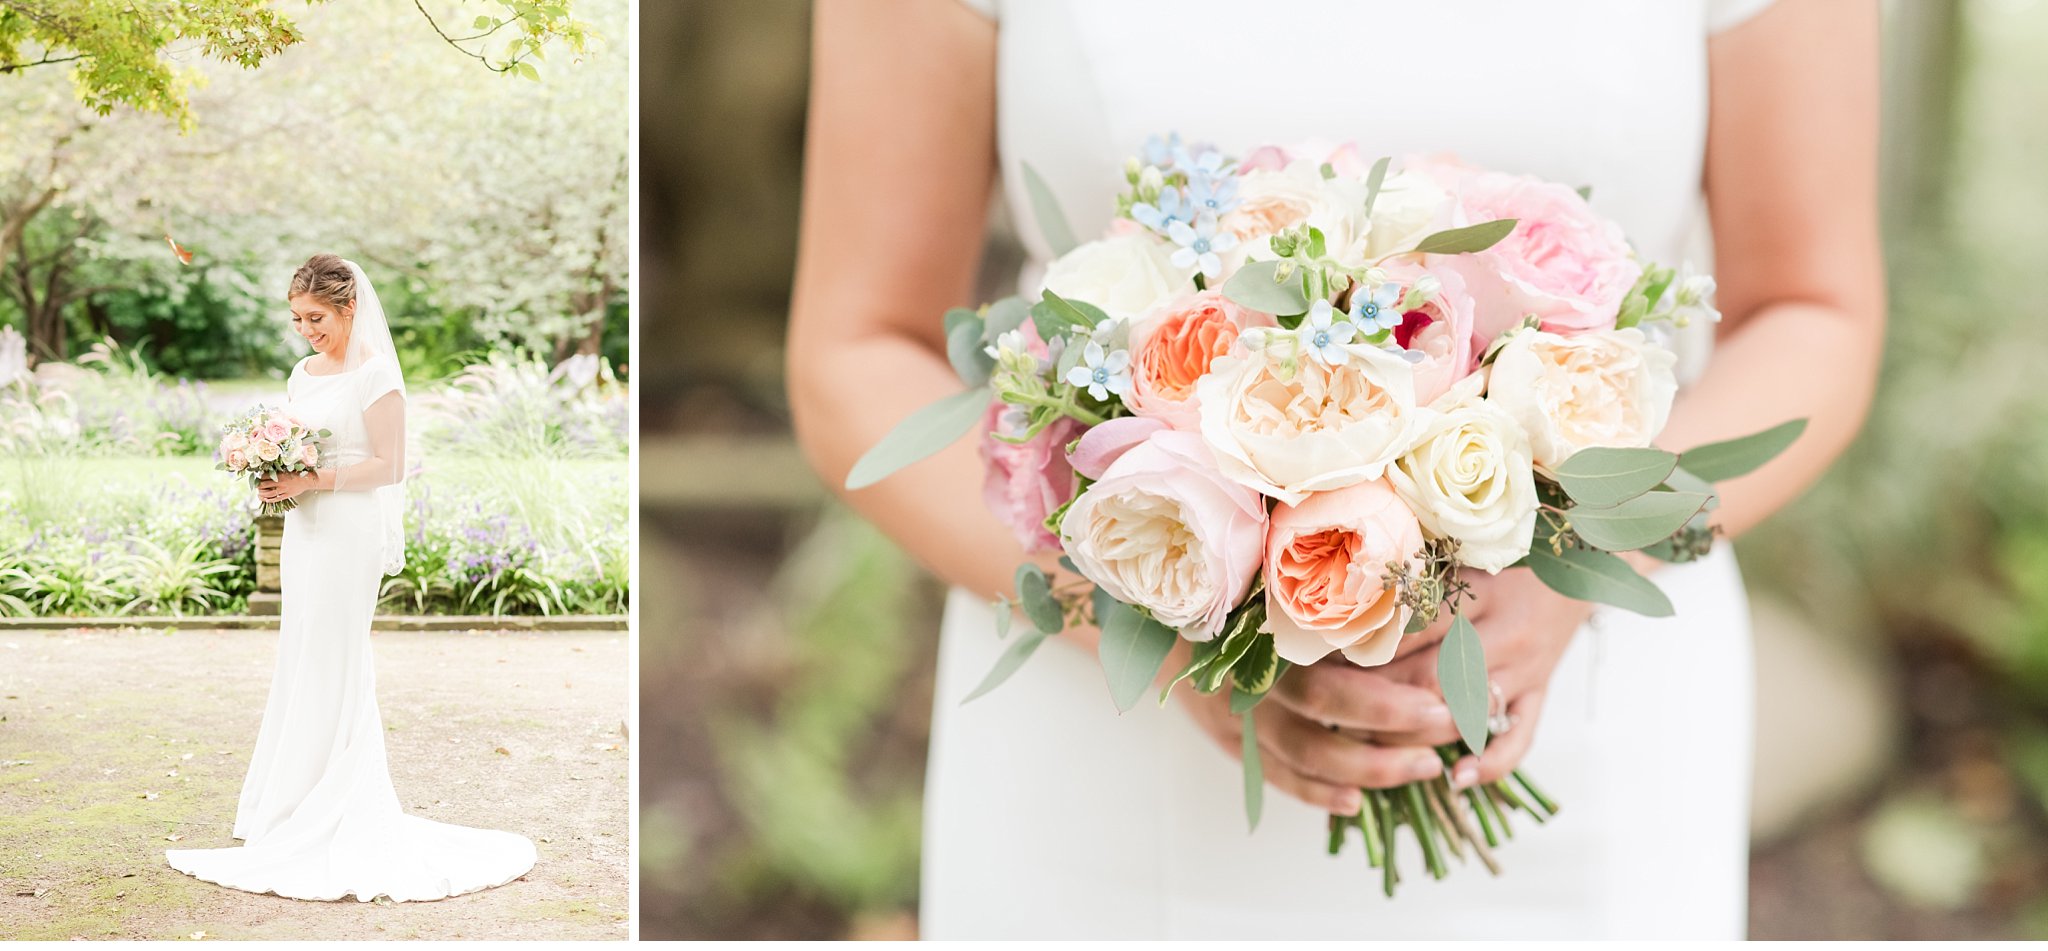 bride with her bouquet by springhill flowers by london ontario wedding photographer life is beautiful photography